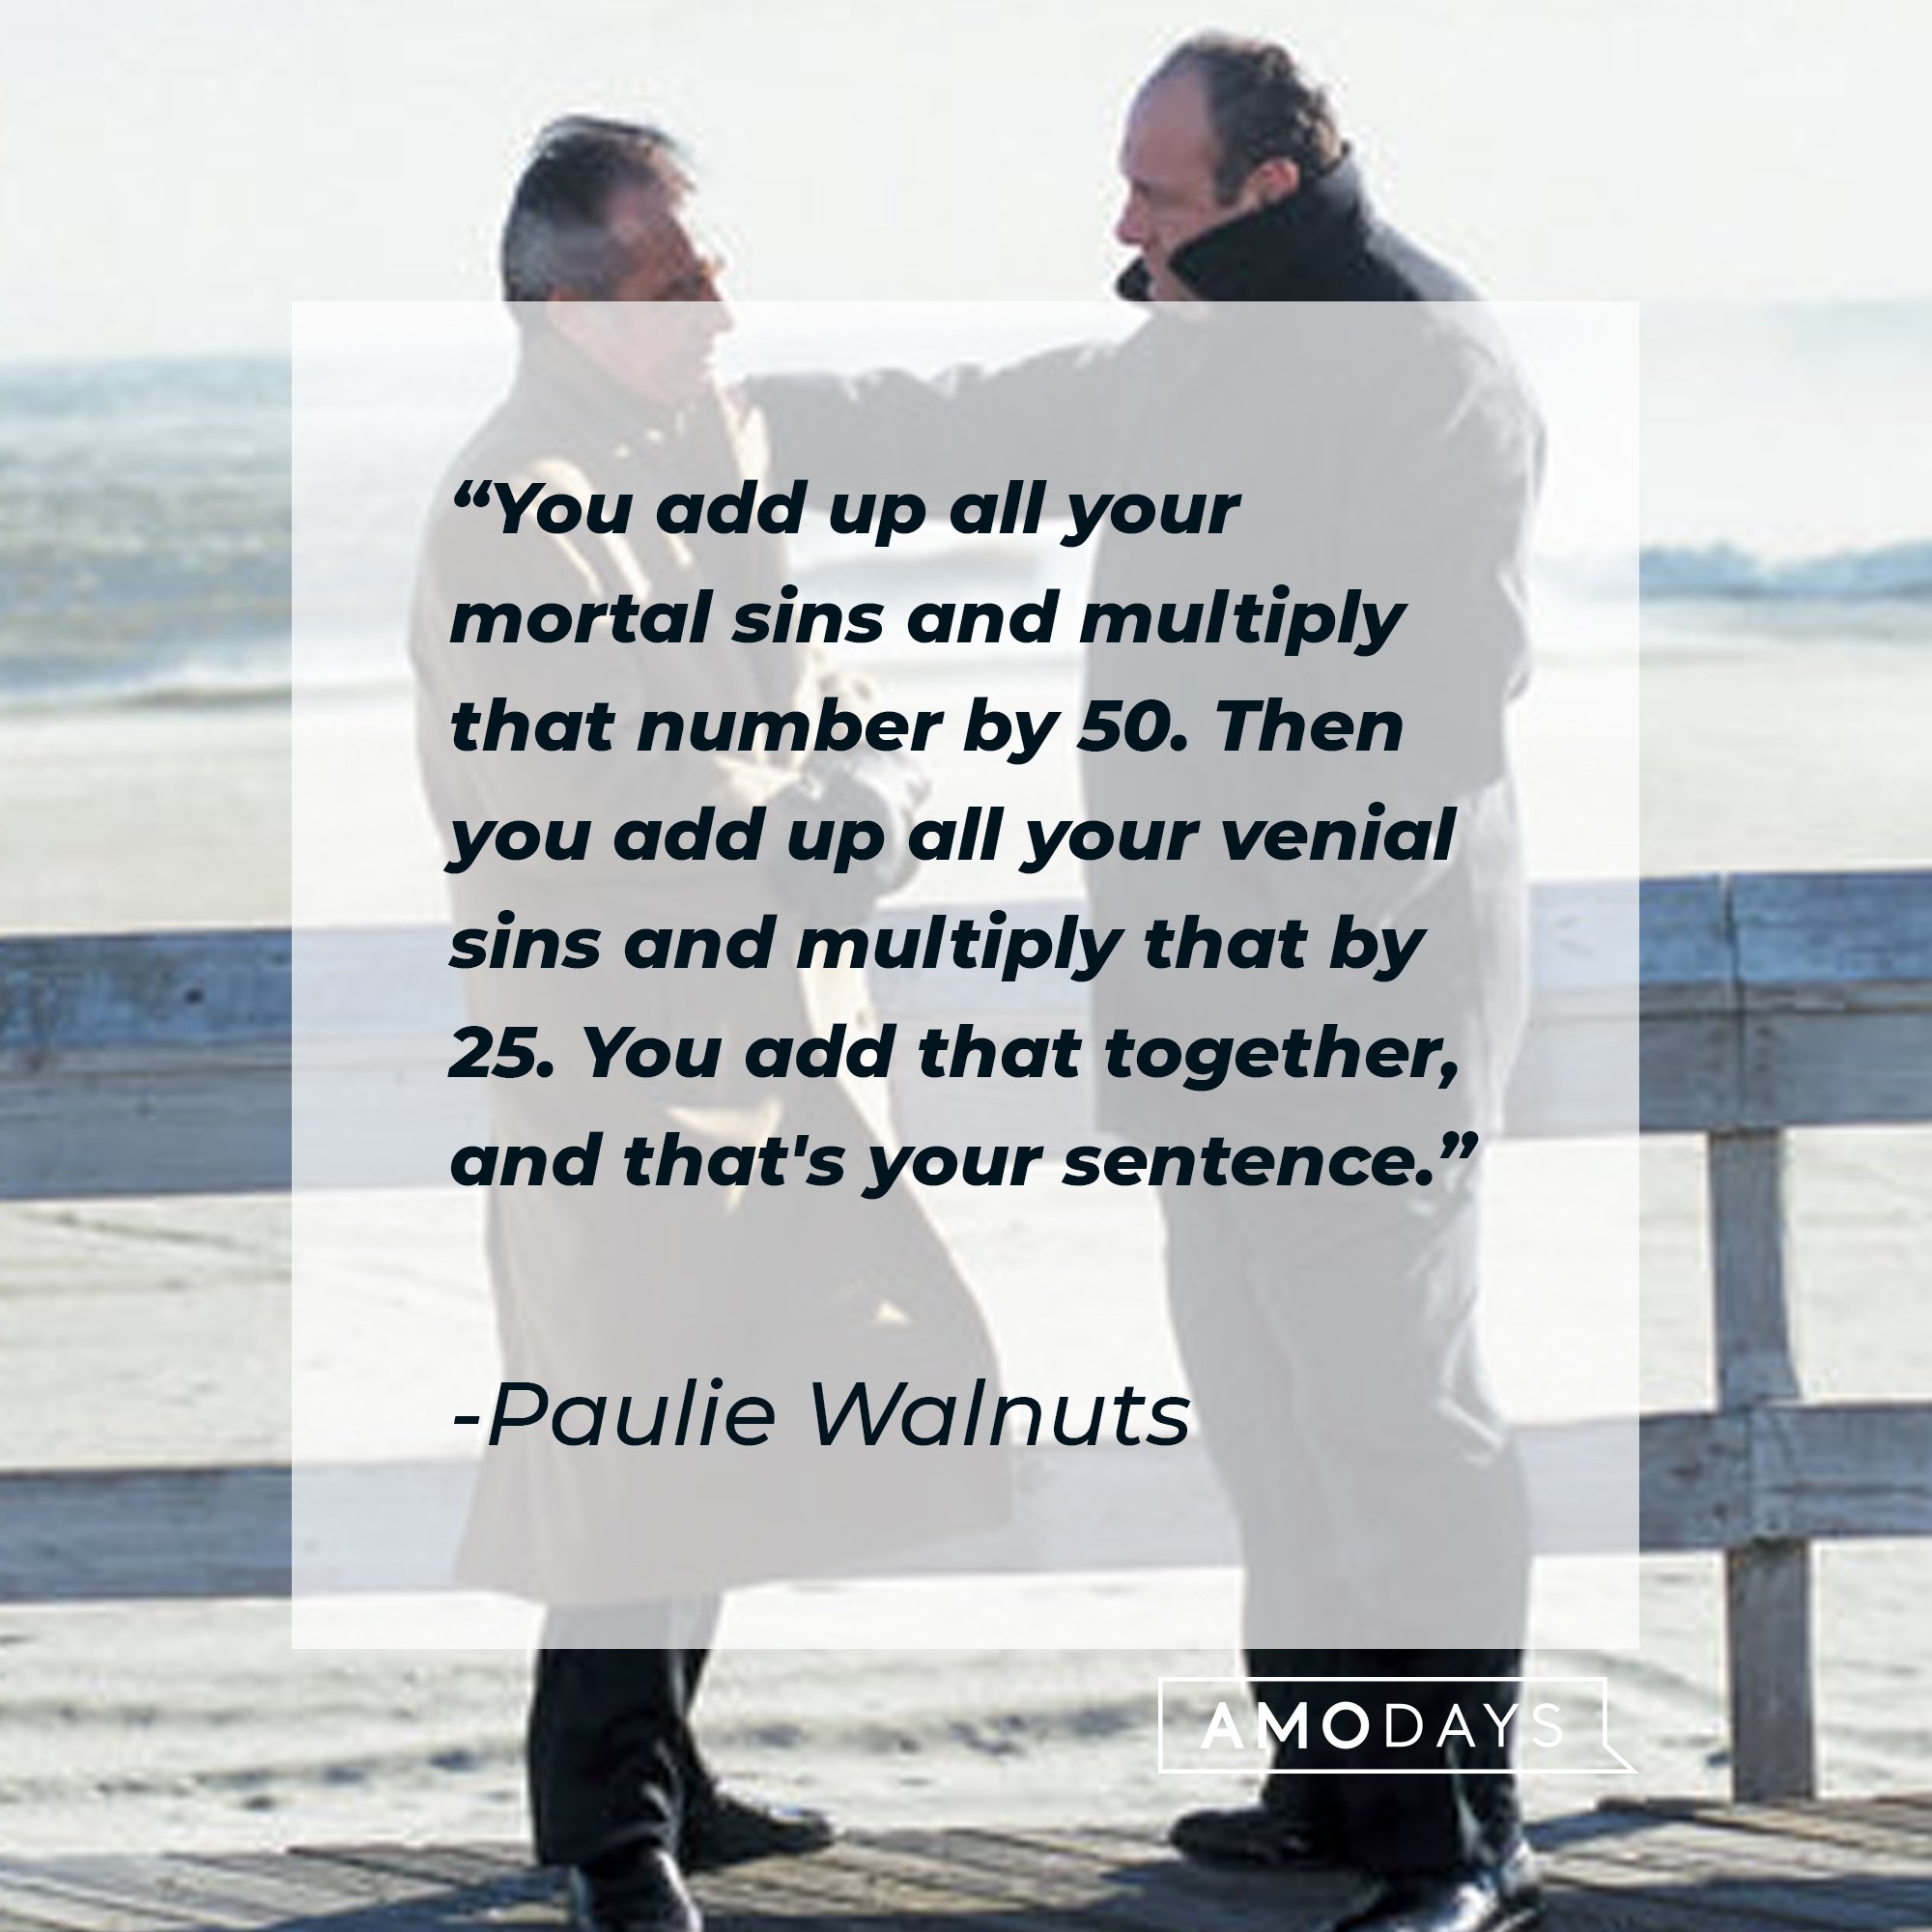 Paulie Walnuts' quote: "You add up all your mortal sins and multiply that number by 50. Then you add up all your venial sins and multiply that by 25. You add that together, and that's your sentence." | Image: AmoDays